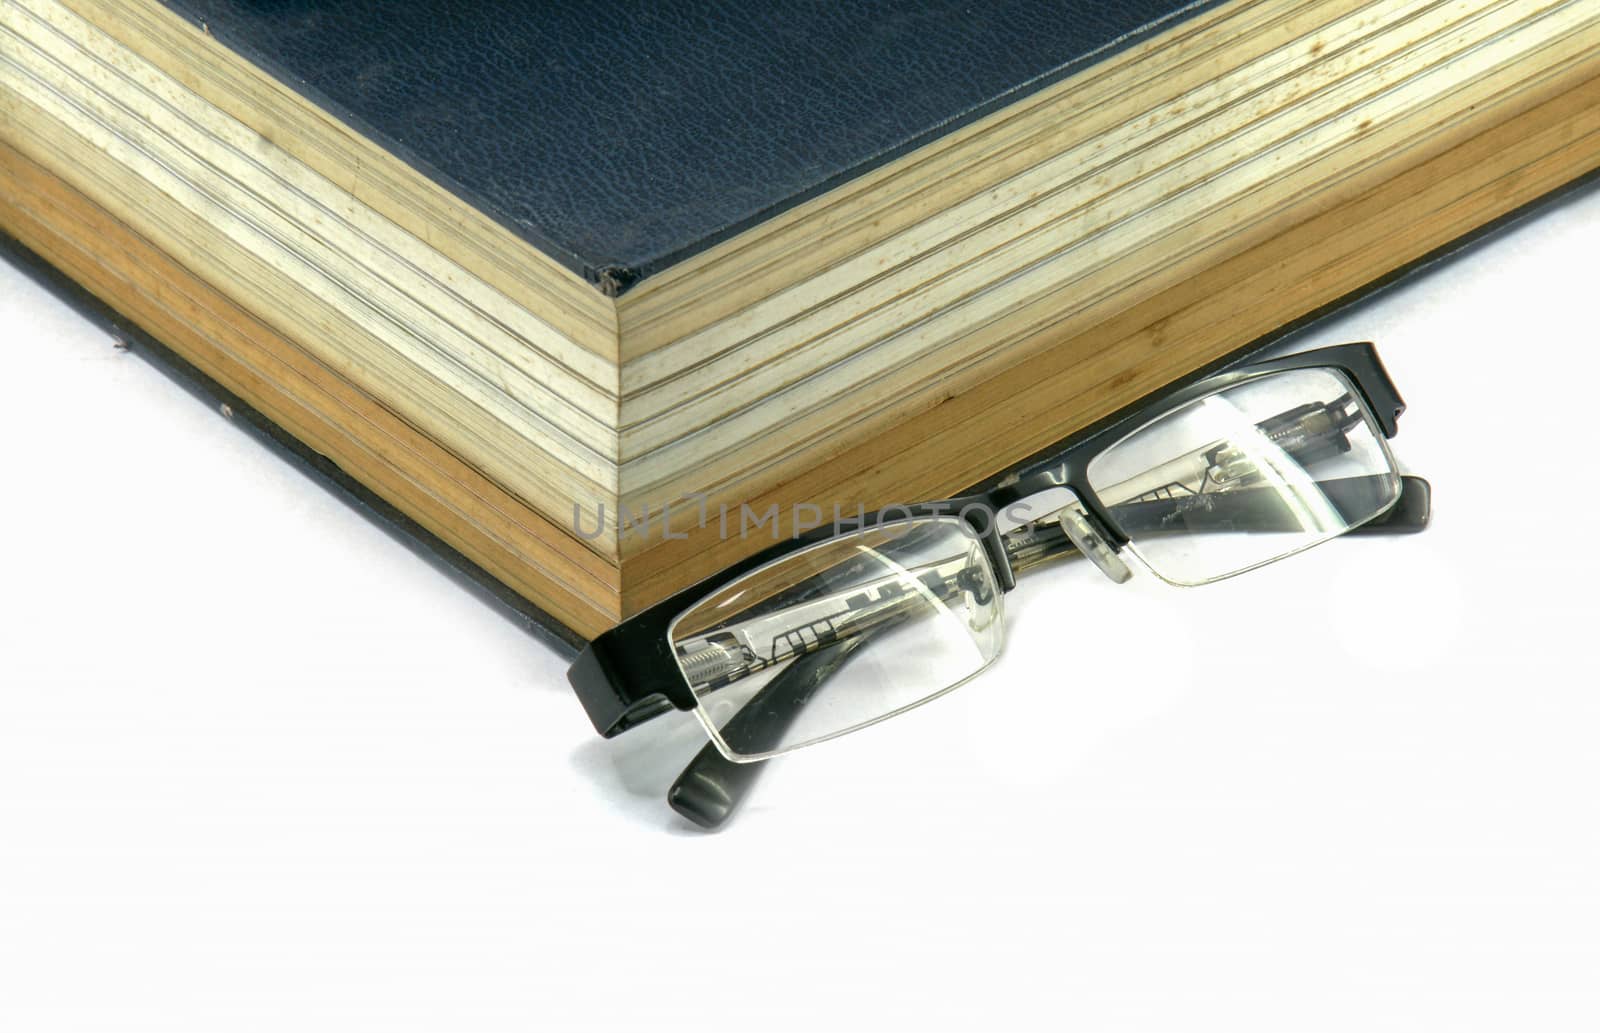 Old text book or bible with eyeglasses